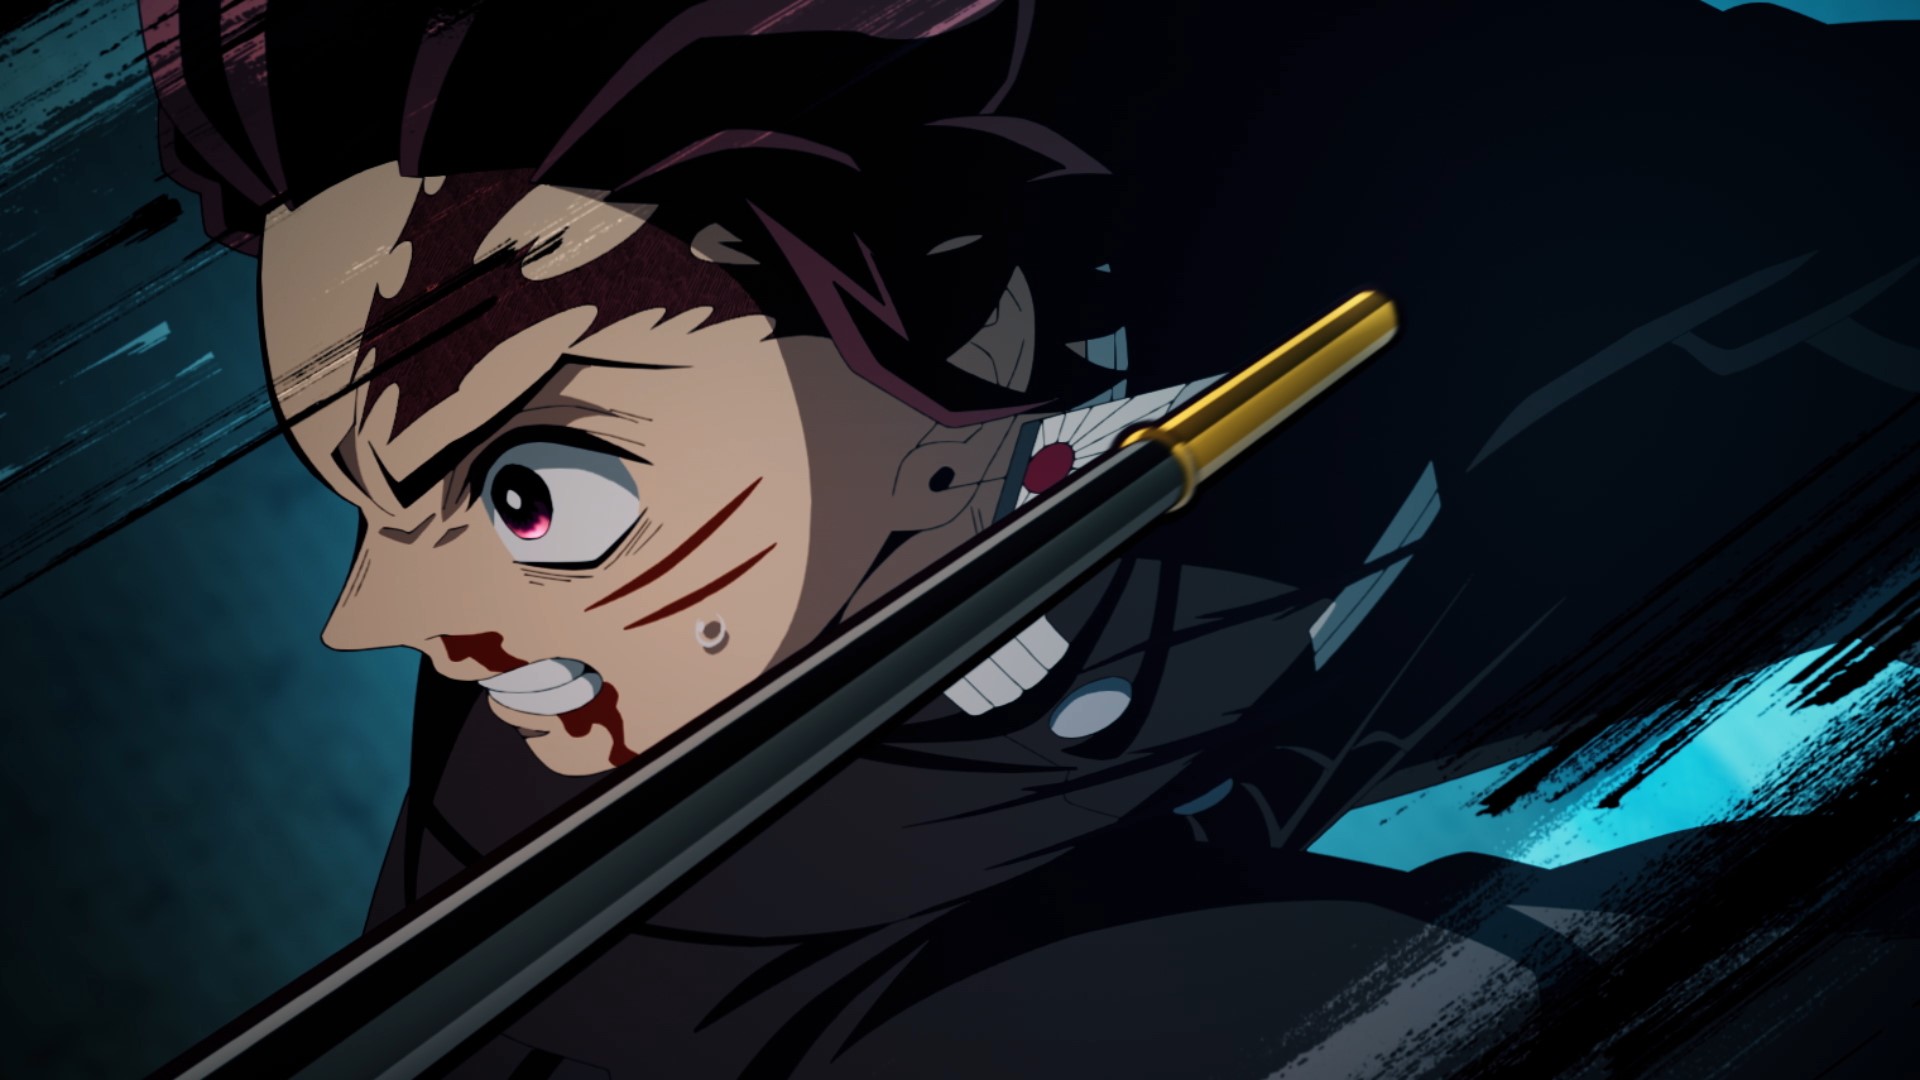 The English dub for episode 1 of Demon Slayer: Kimetsu no Yaiba Swordsmith  Village Arc is now live on Crunchyroll! This has been a highly…